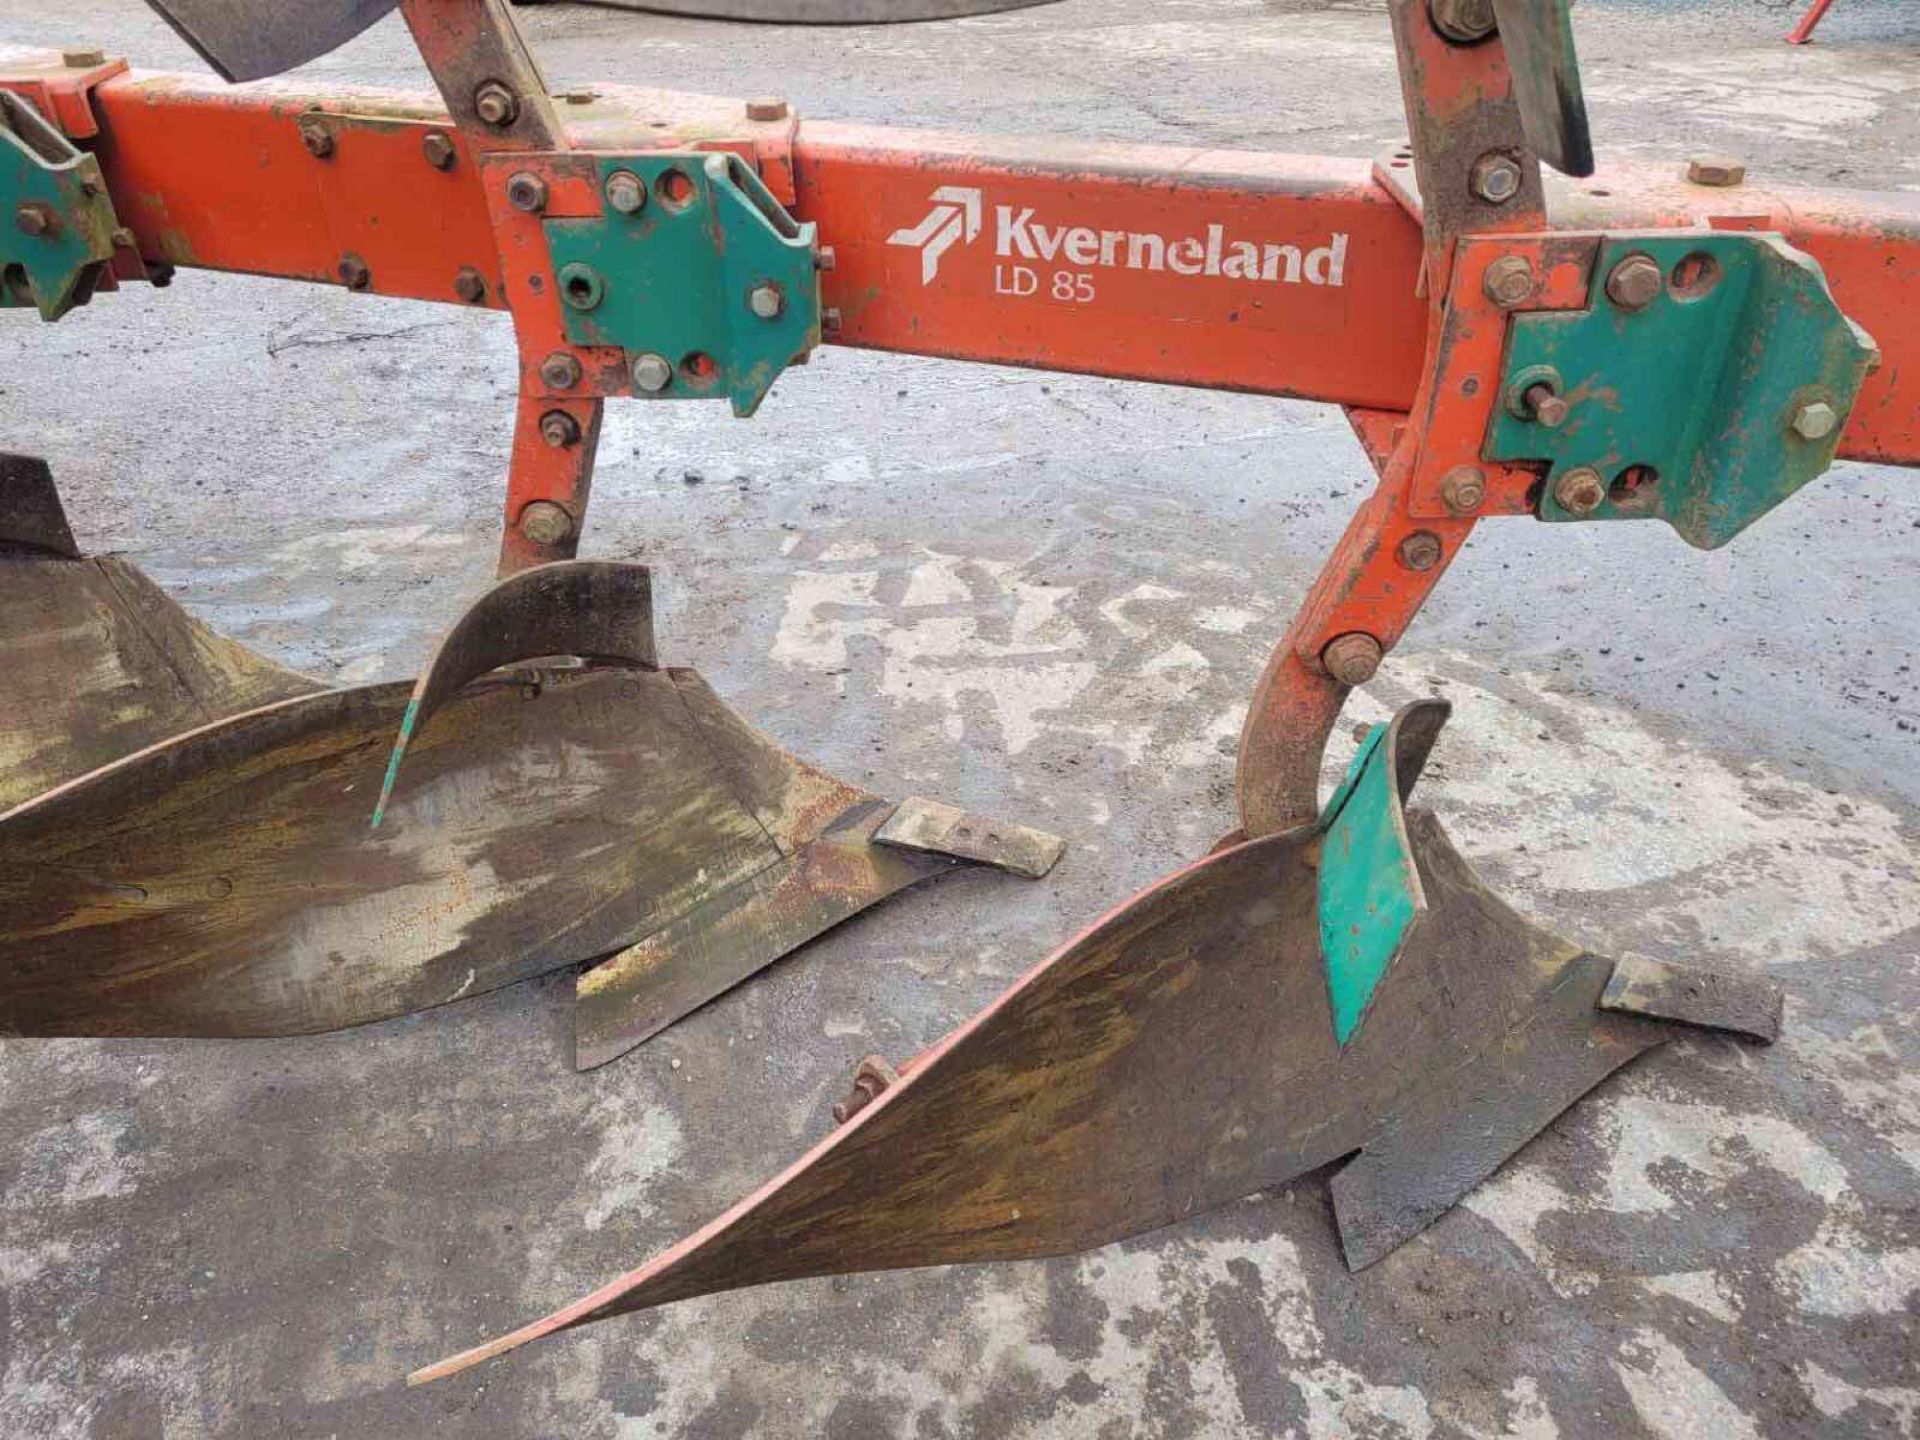 Kverneland LD85 5f (4f+1f) reversible plough with skimmers, manual vari-width - Image 5 of 7